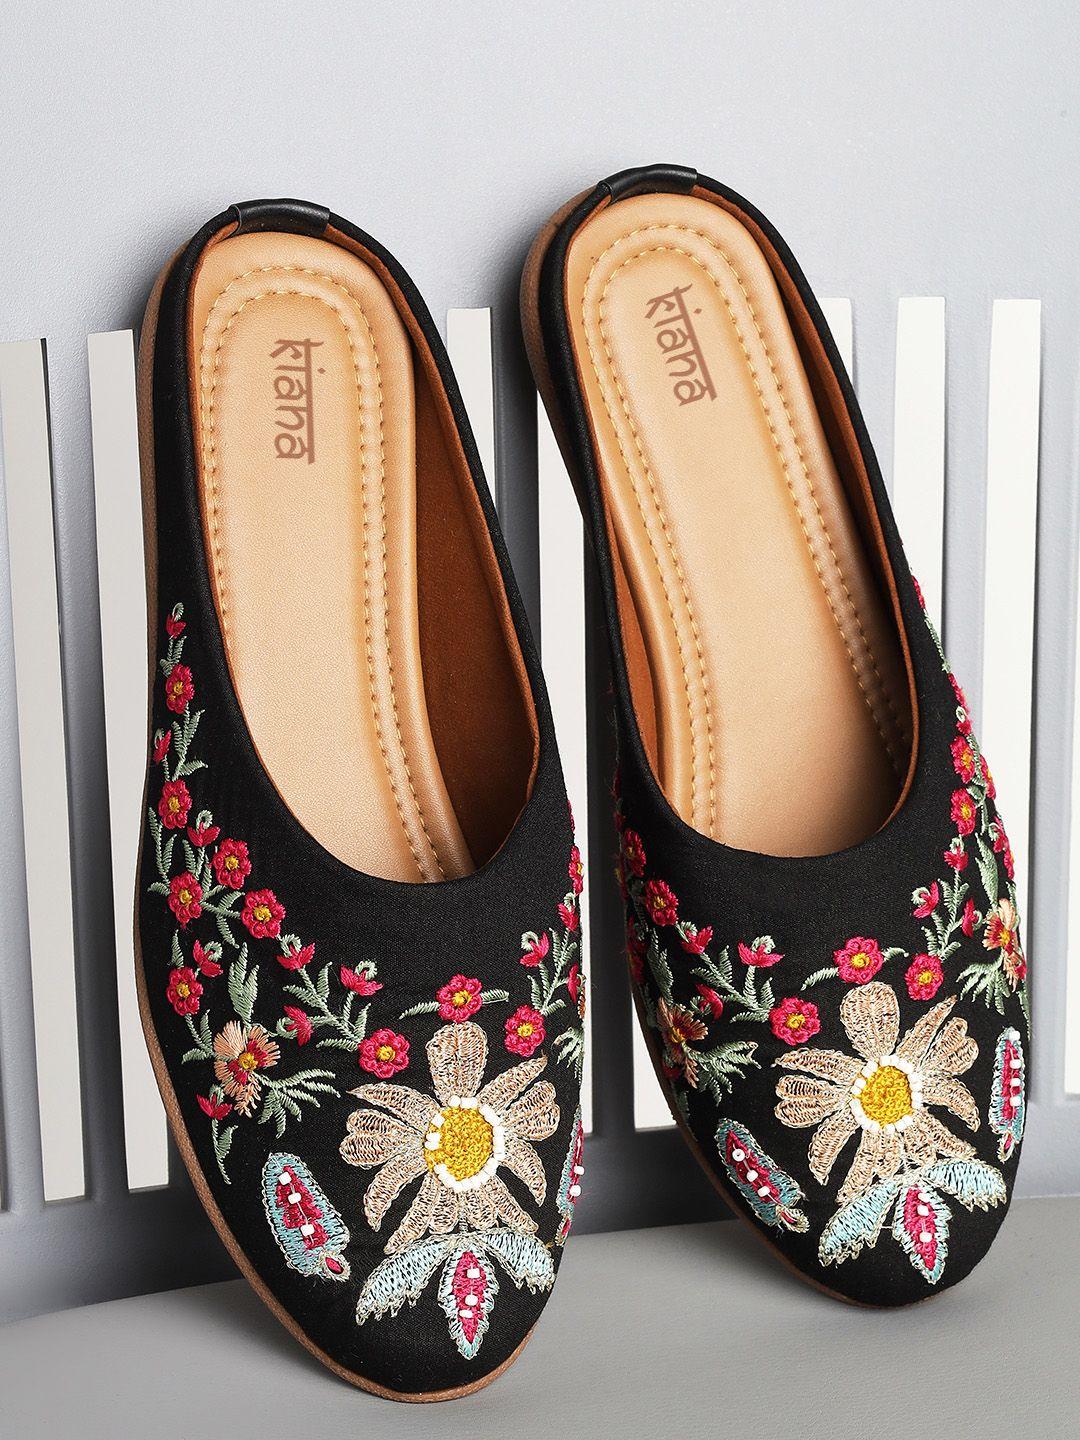 kiana women black floral embroidered mules flats